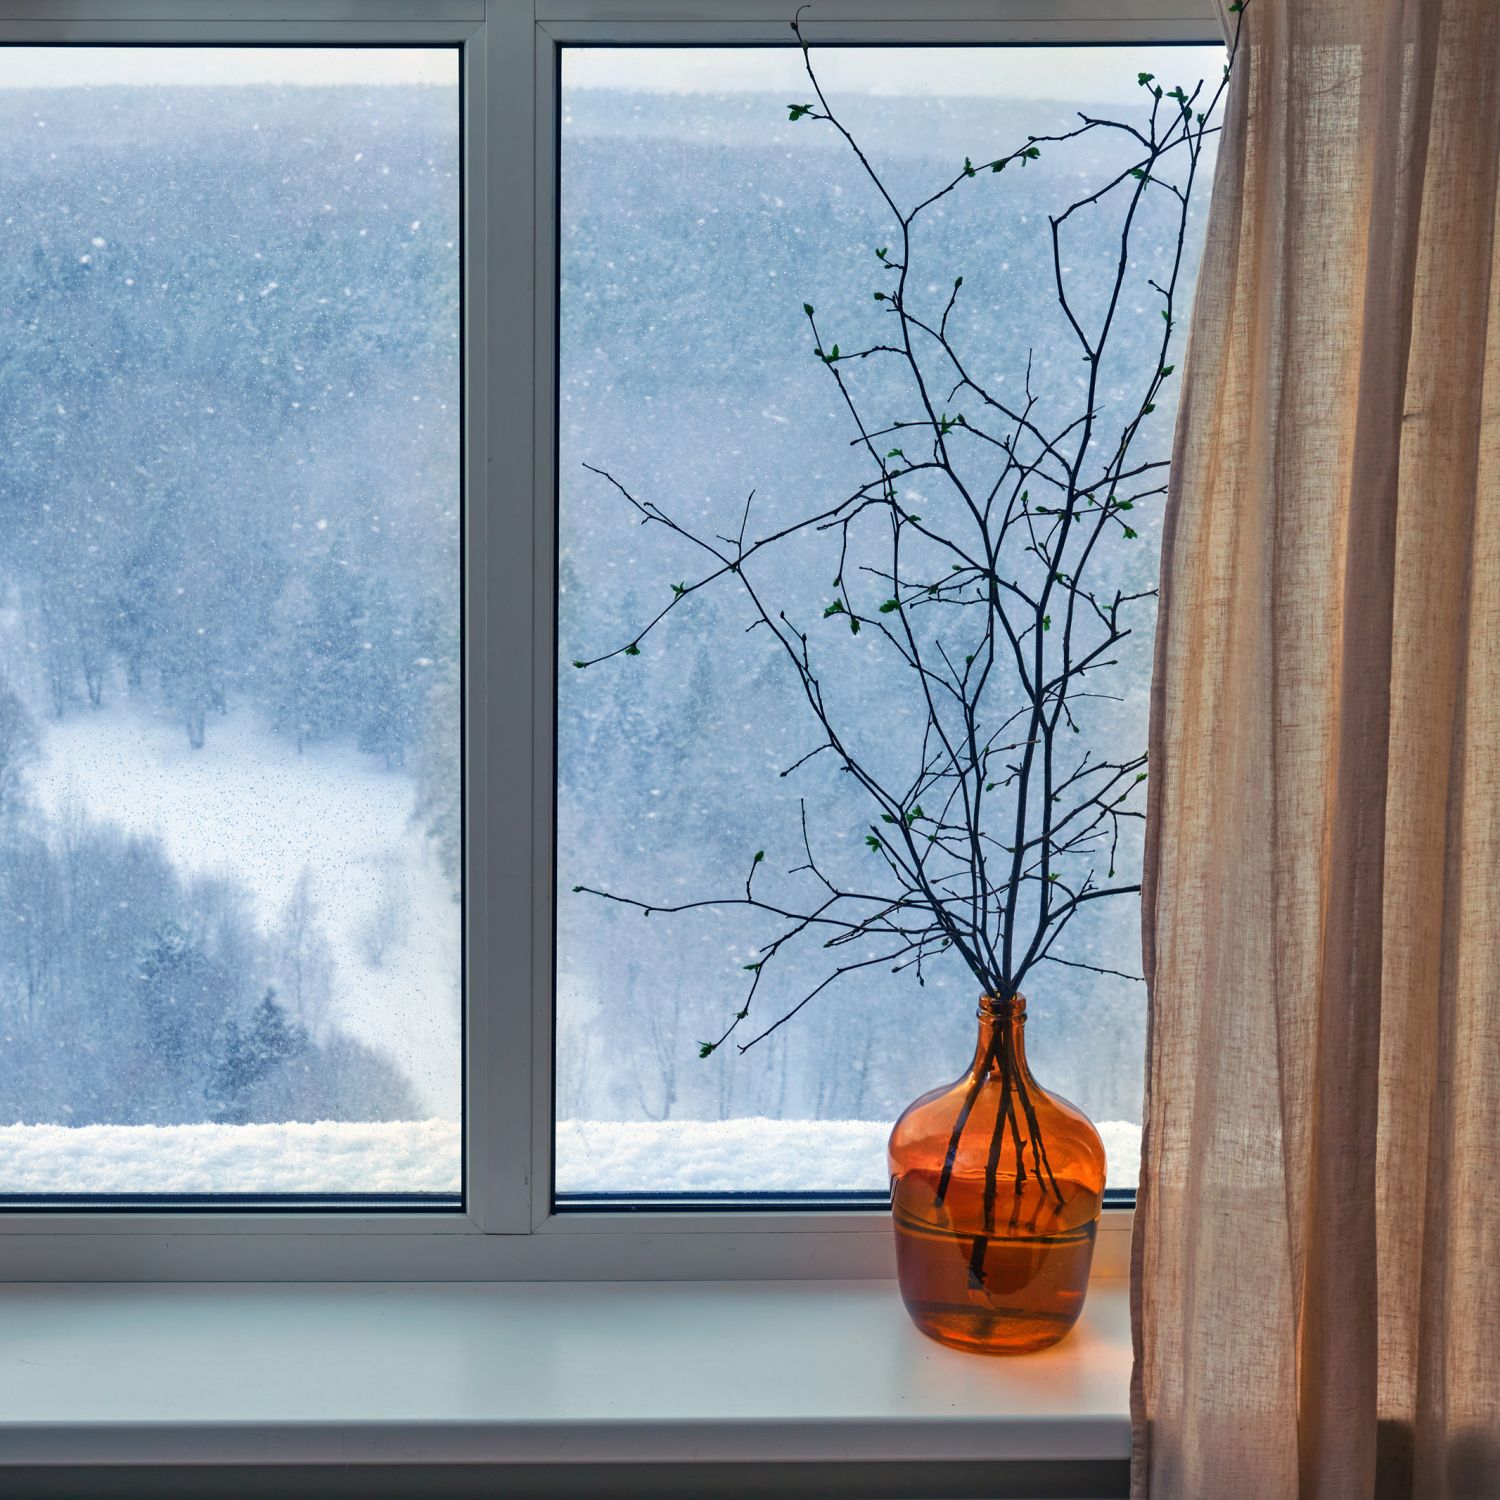 Branches of a tree stand in a vase in front of a drafty window in the winter.